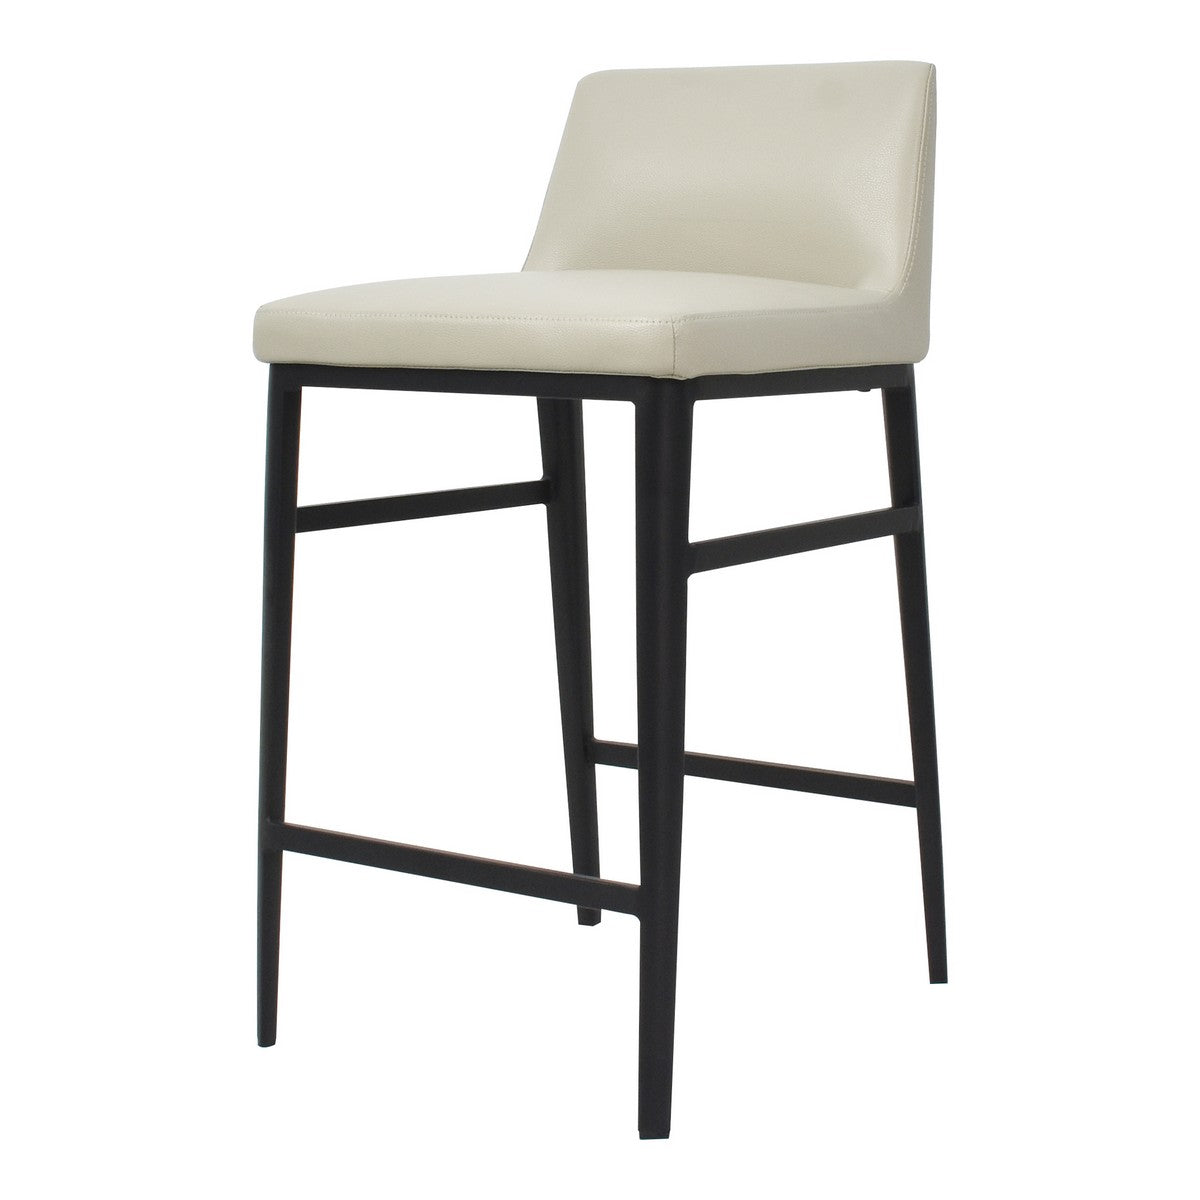 Moe's Home Collection Baron Counter Stool Beige - EJ-1031-34